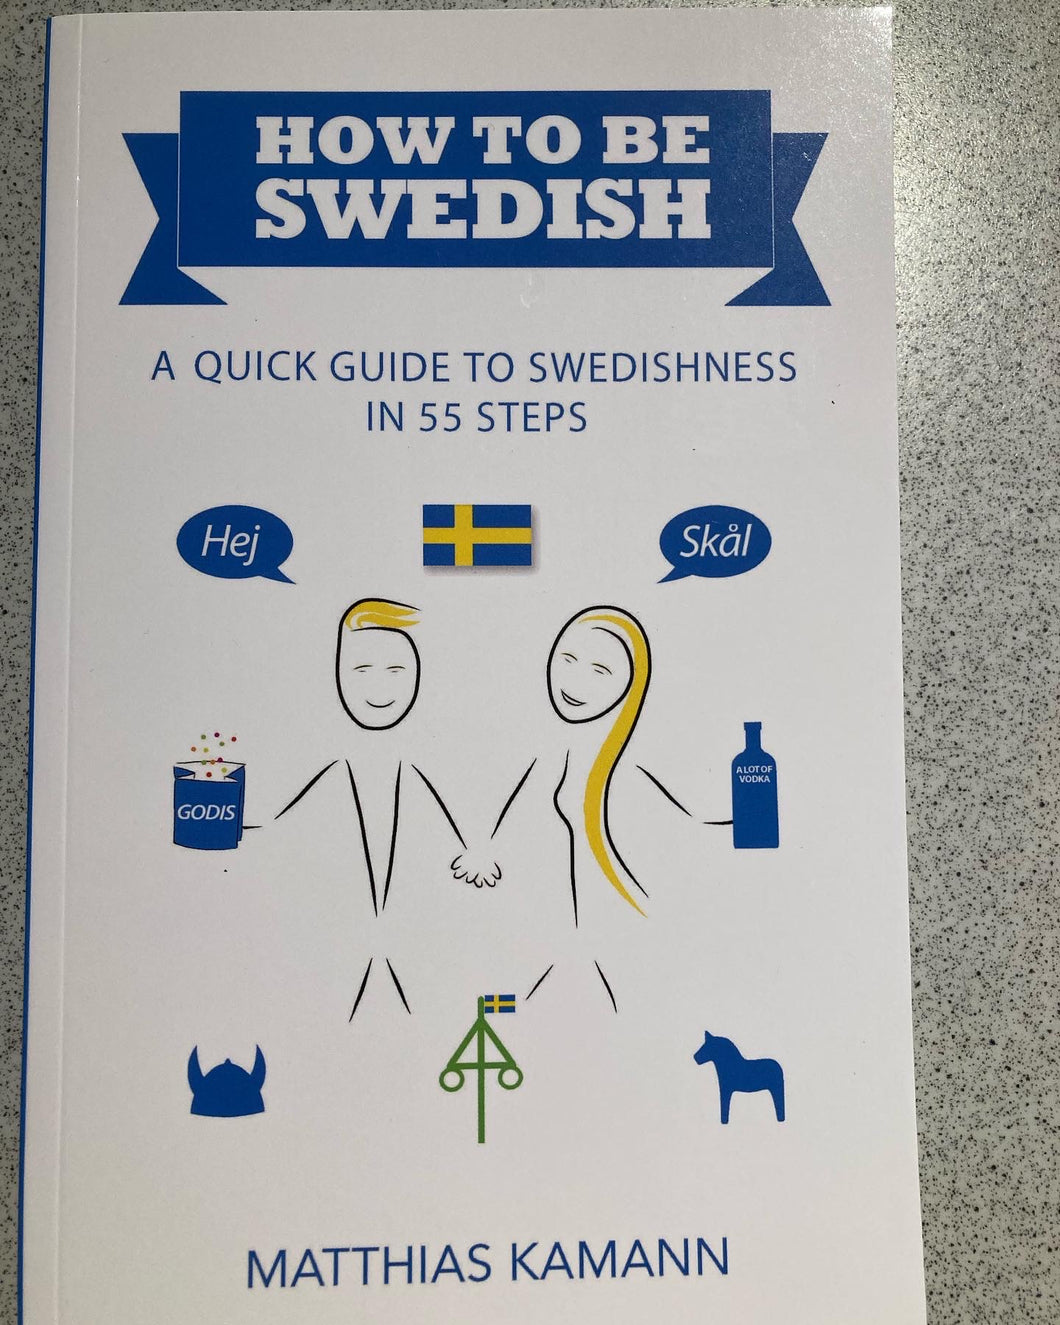 How to be a Swedish by Matthias Kamann